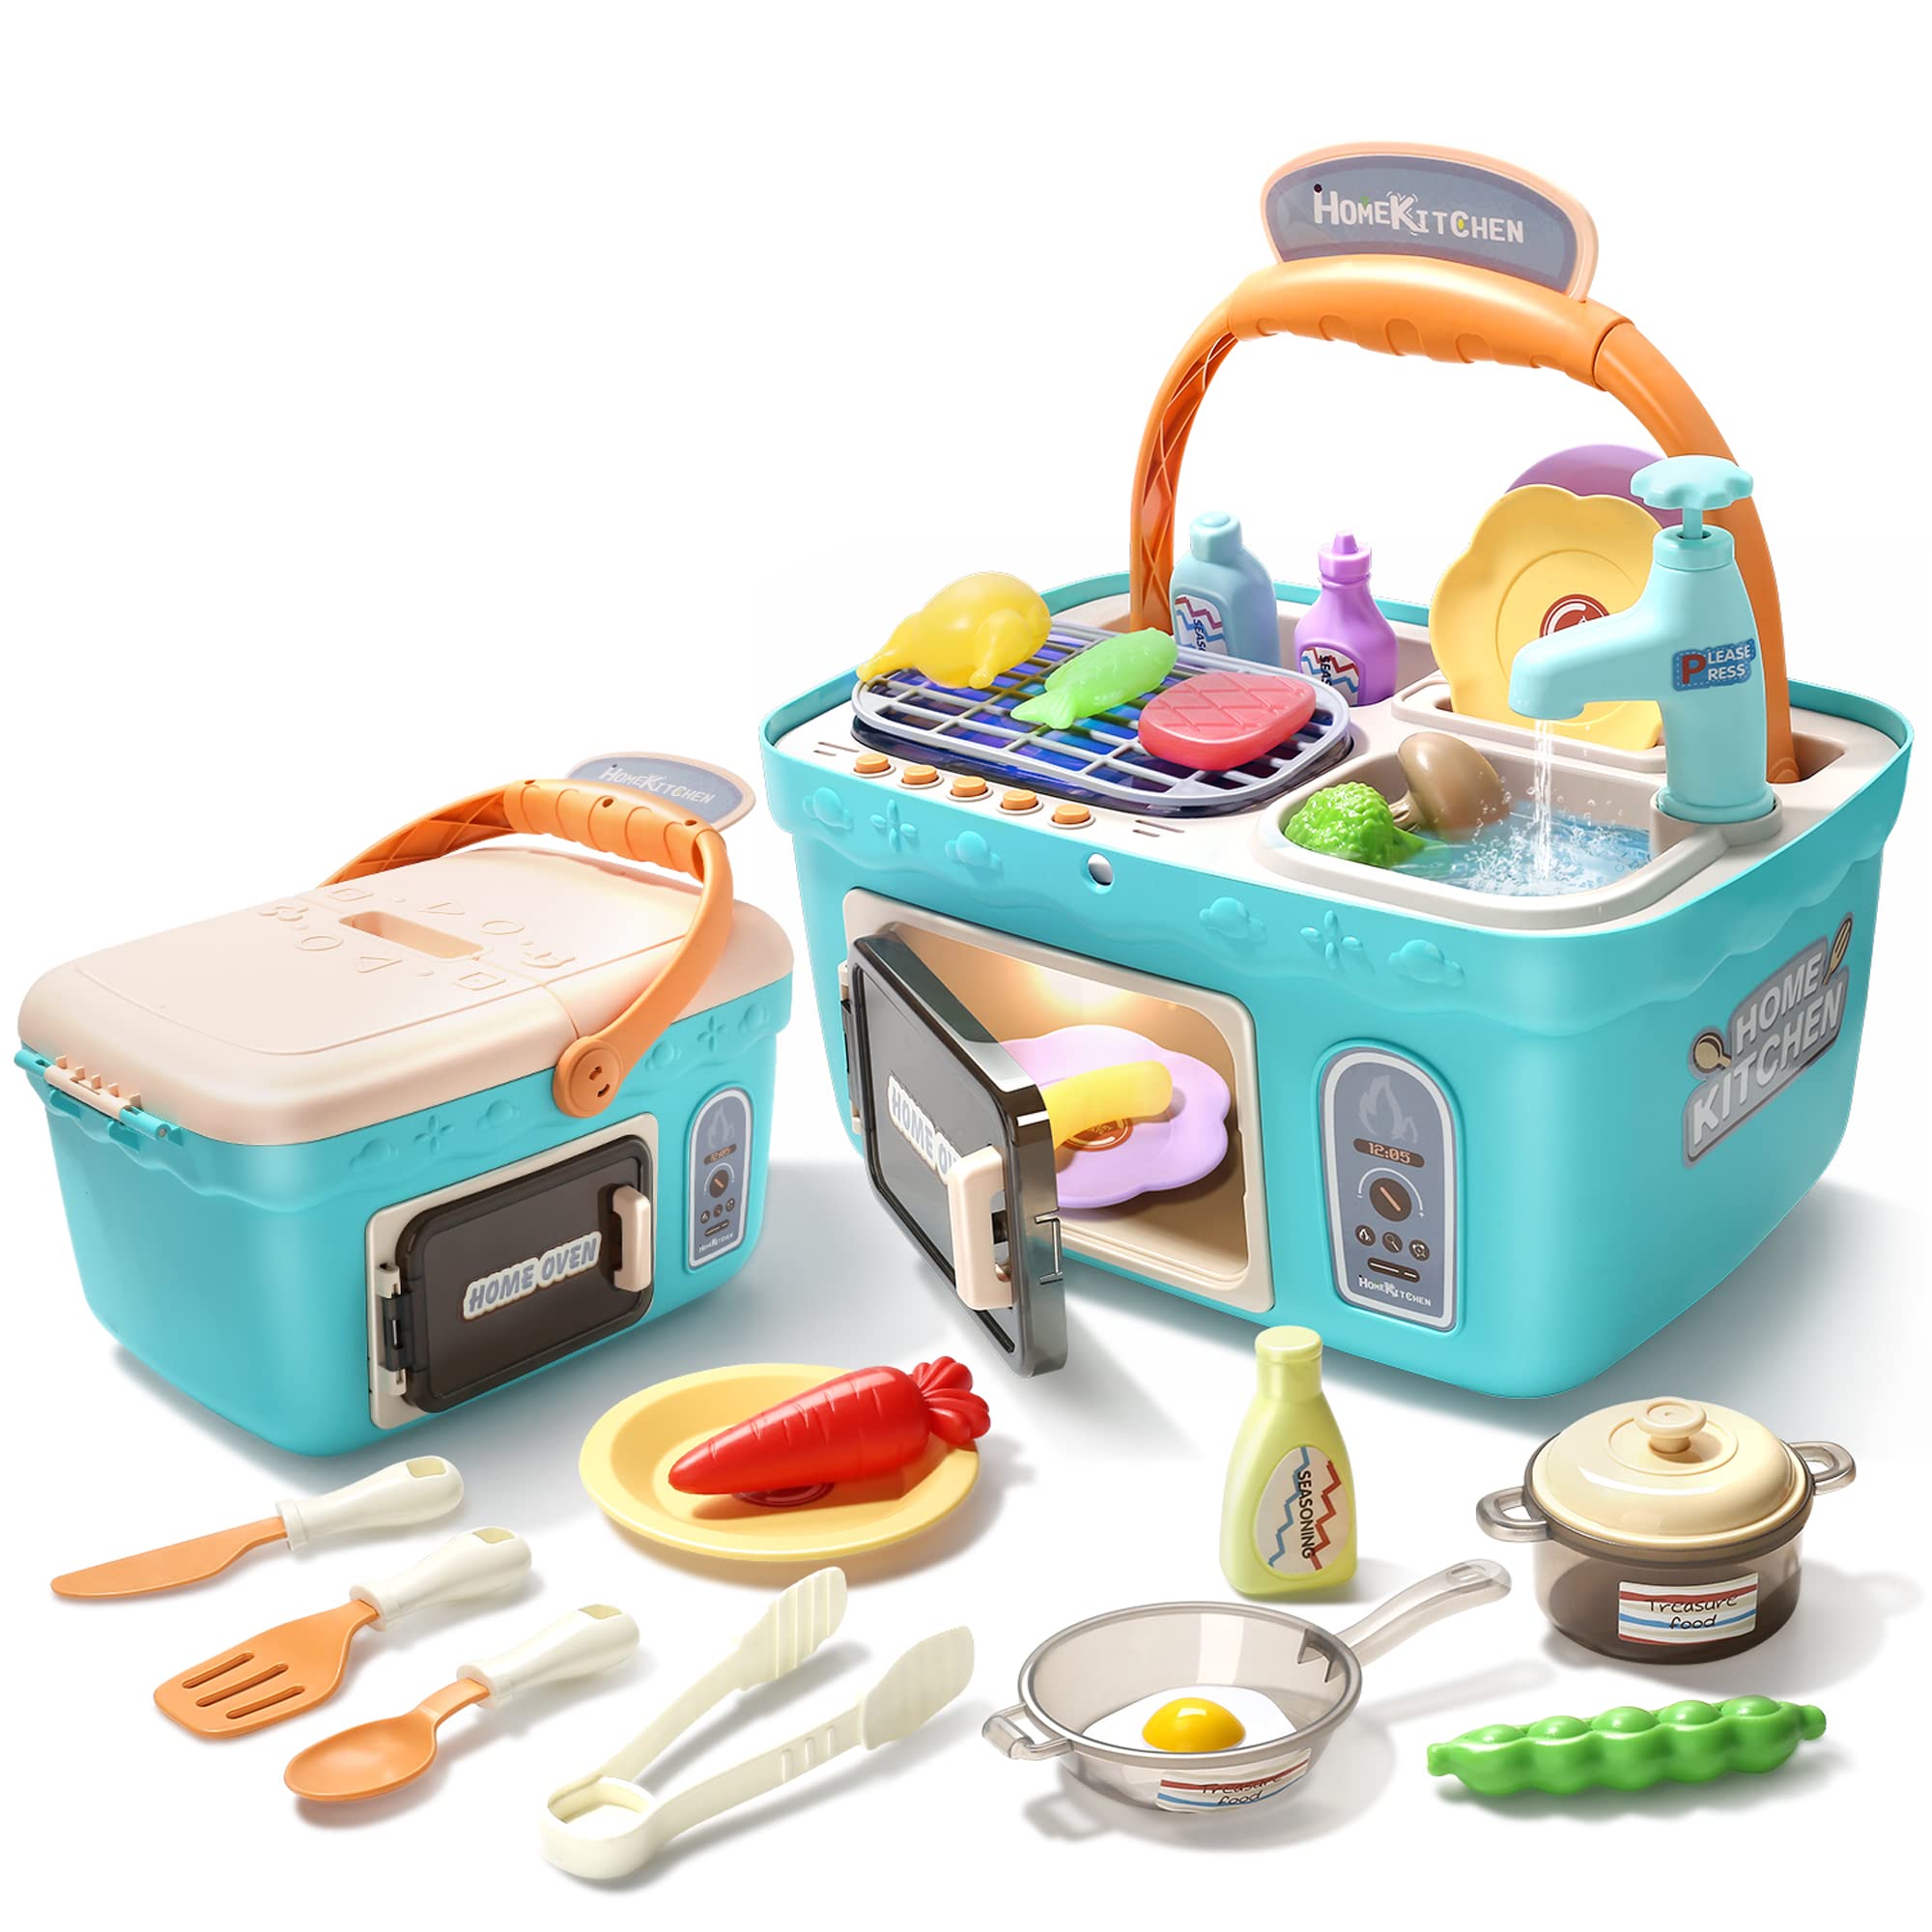 CUTE STONE Microwave Toys Kitchen Play Set, Kids Pretend Play Electronic  Oven with Play Food, Kids Cookware Pot and Pan Toy Set, Cooking